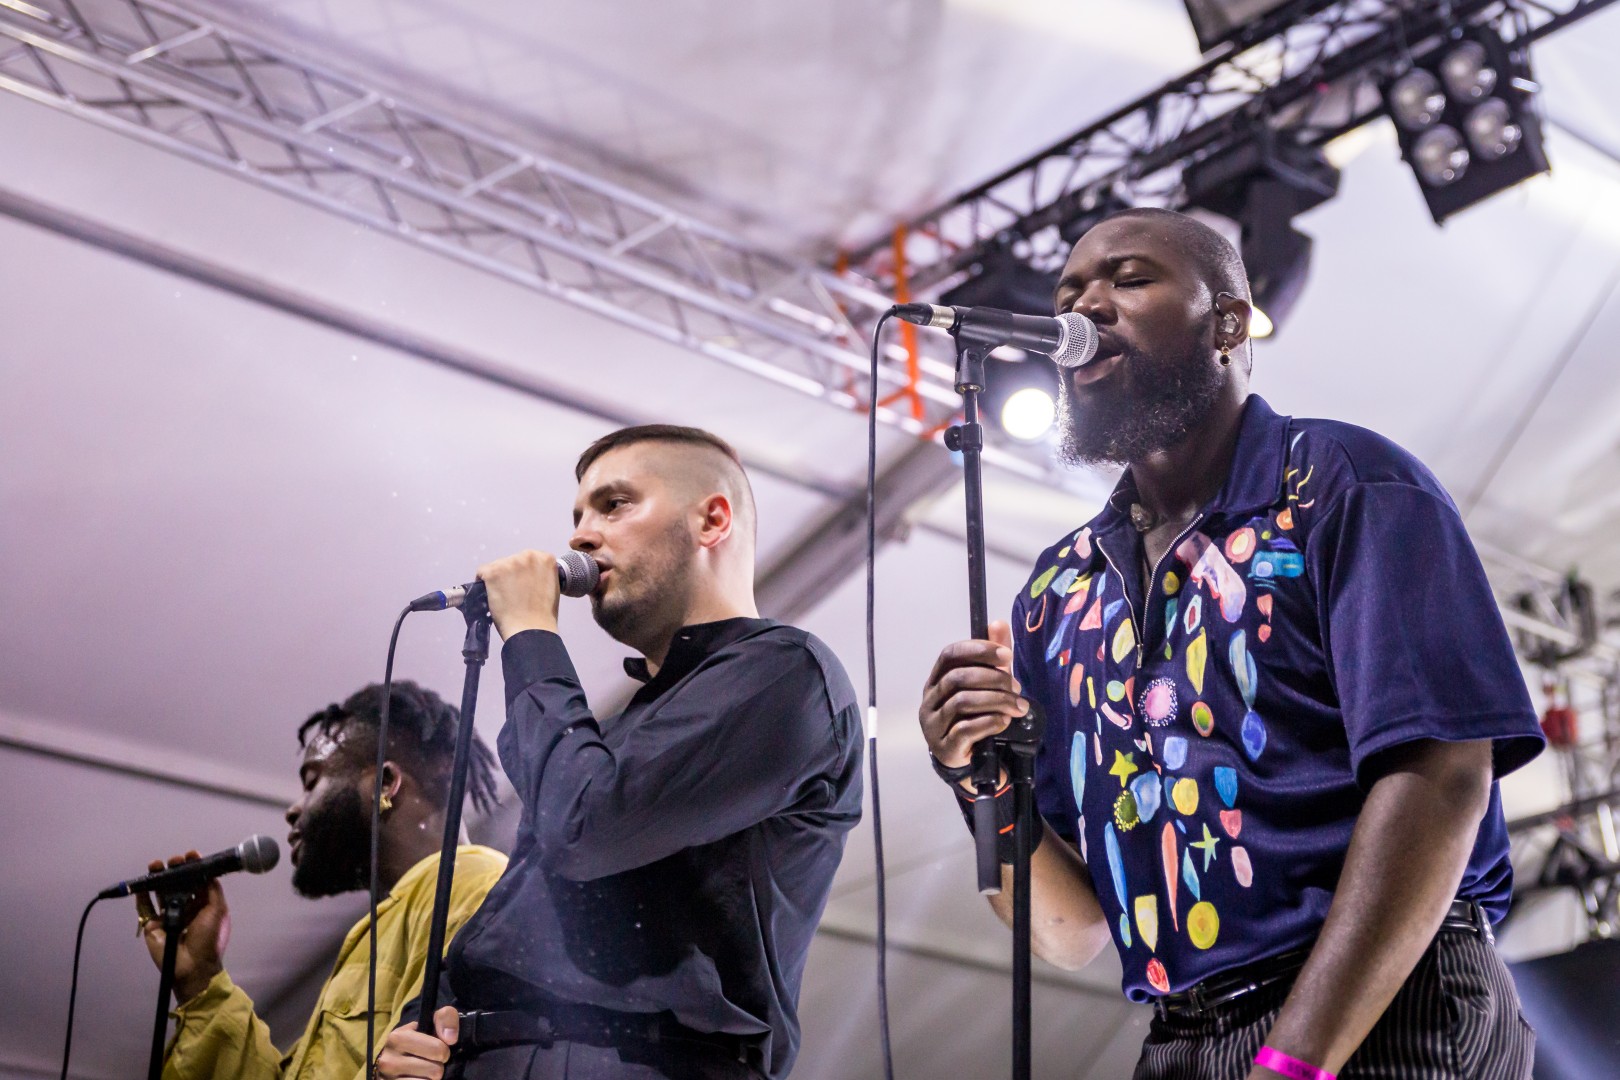 Young Fathers at Romexpo in Bucharest on July 20, 2017 (ddc3d8a517)